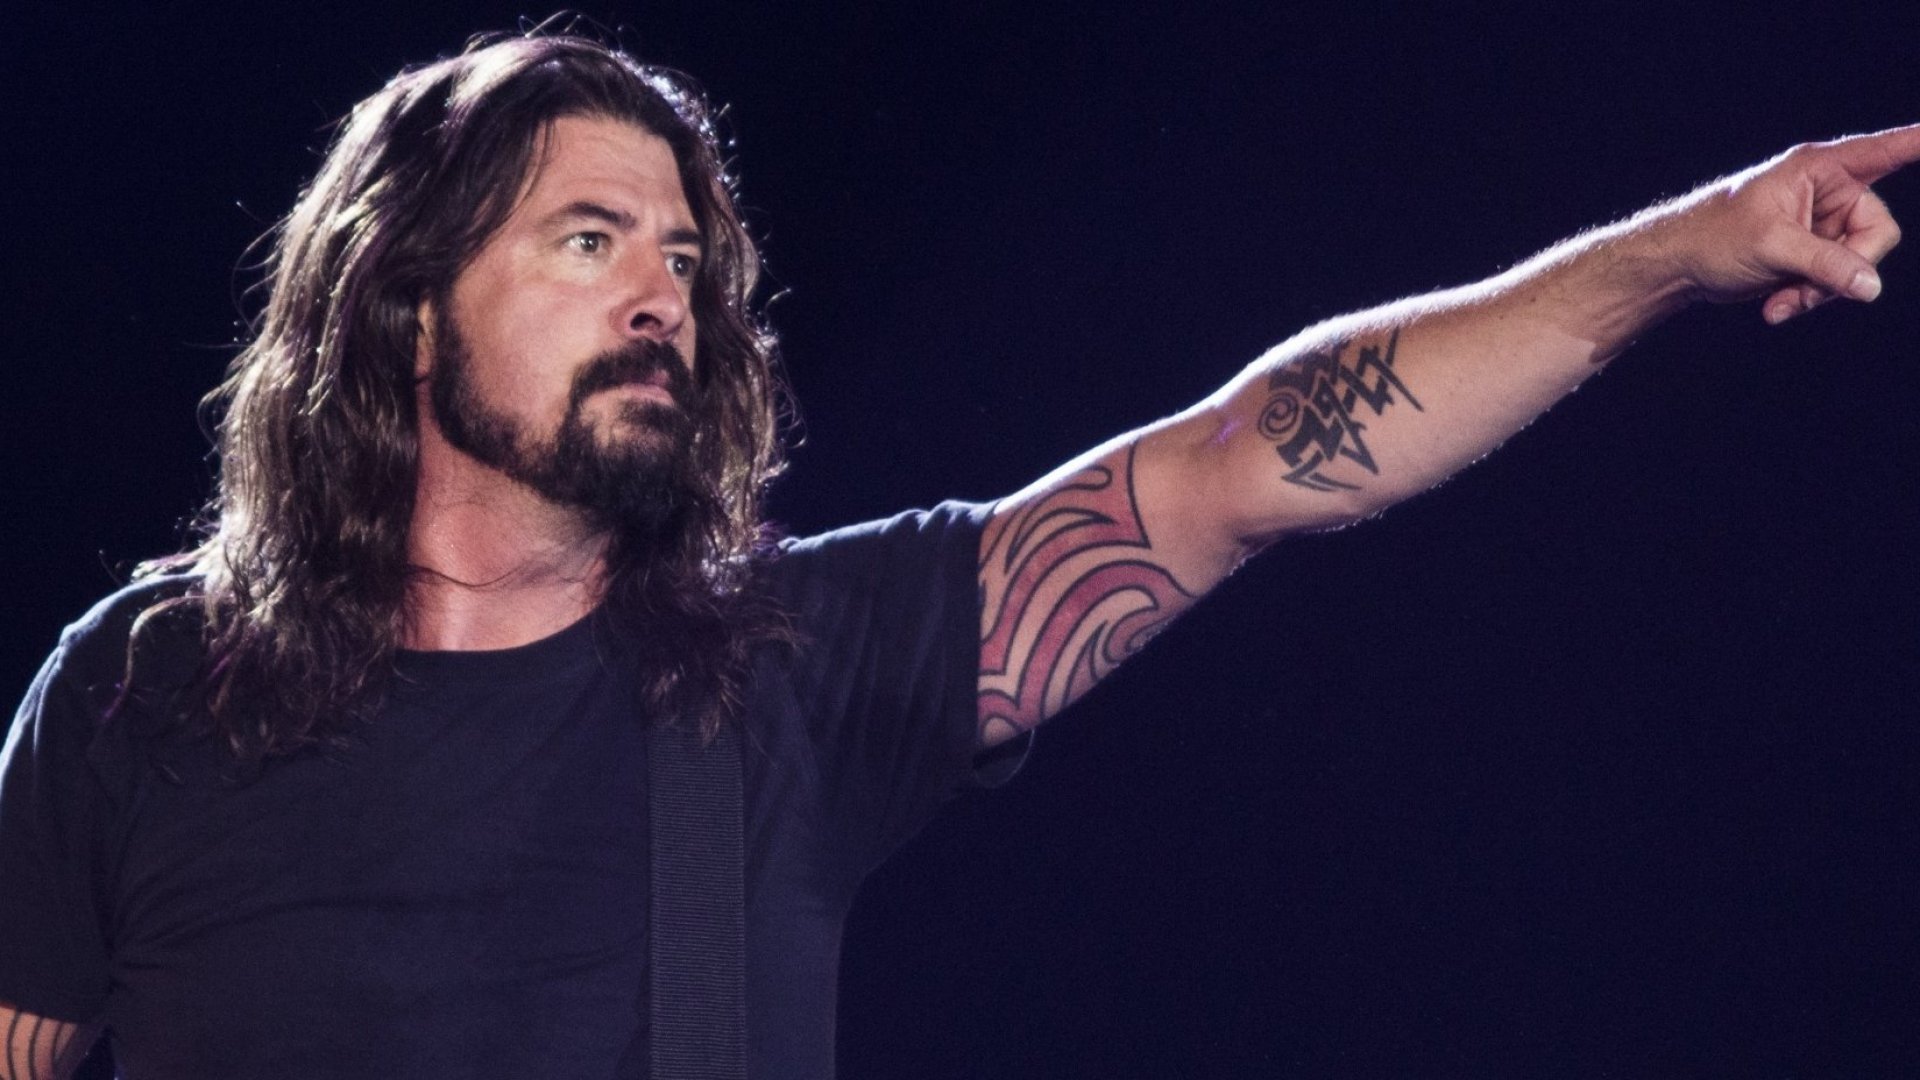 Dave Grohl Biography: Wife, Children, Height, Instagram, Age, Net Worth, Songs, Albums